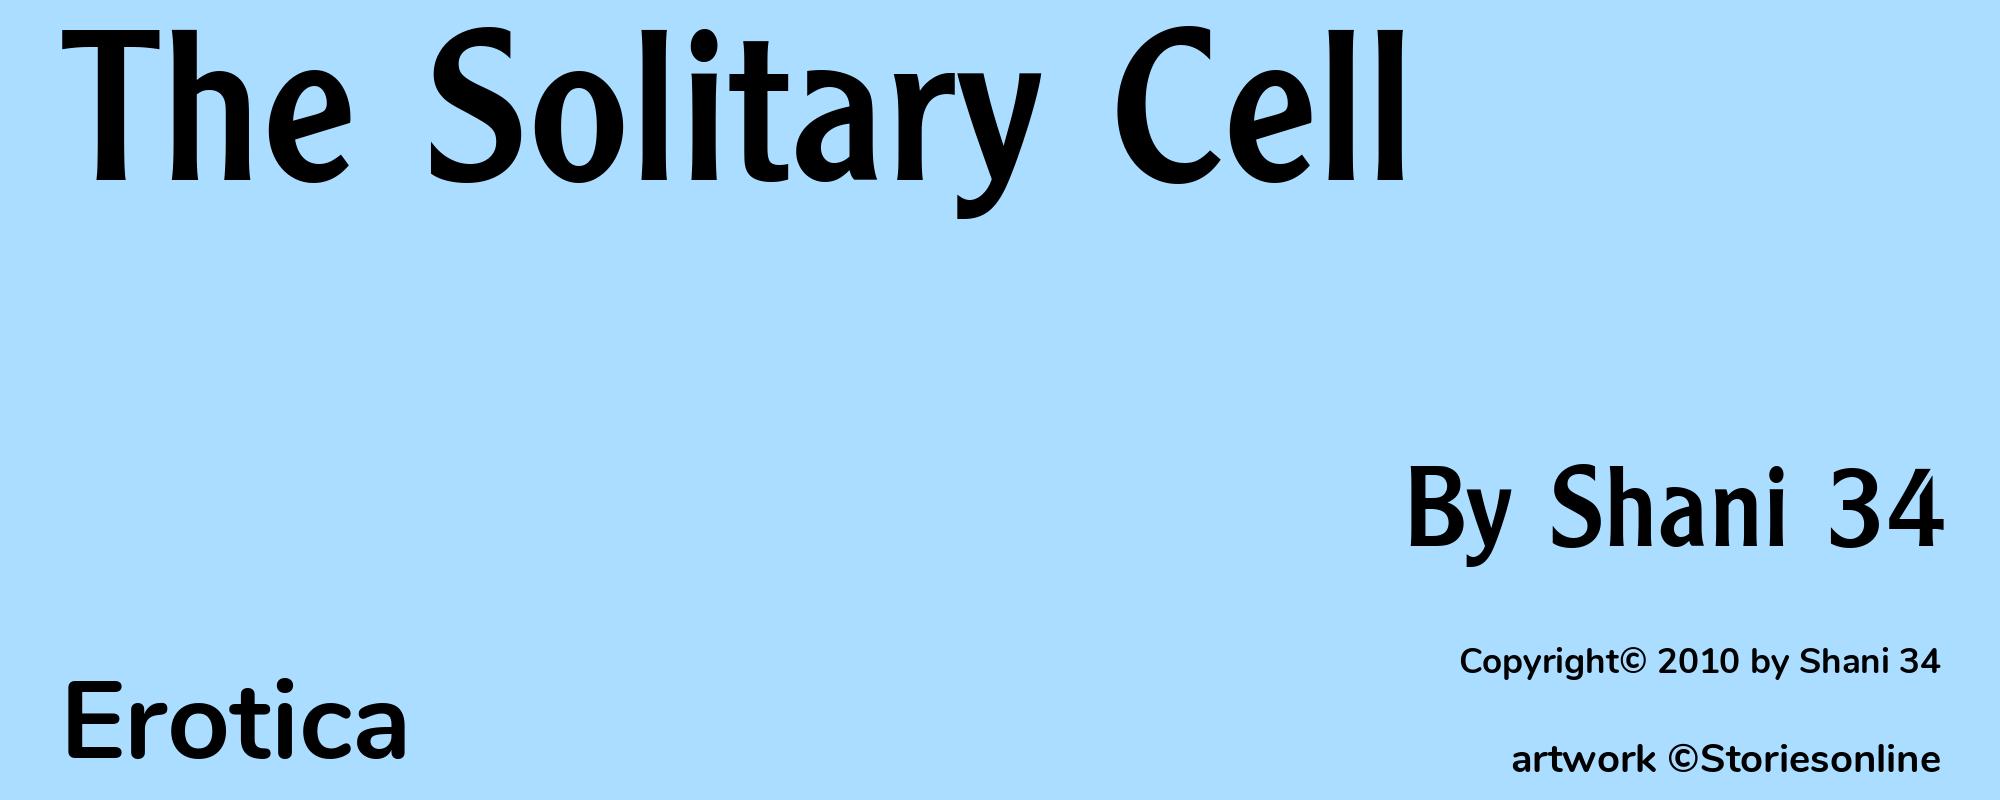 The Solitary Cell - Cover